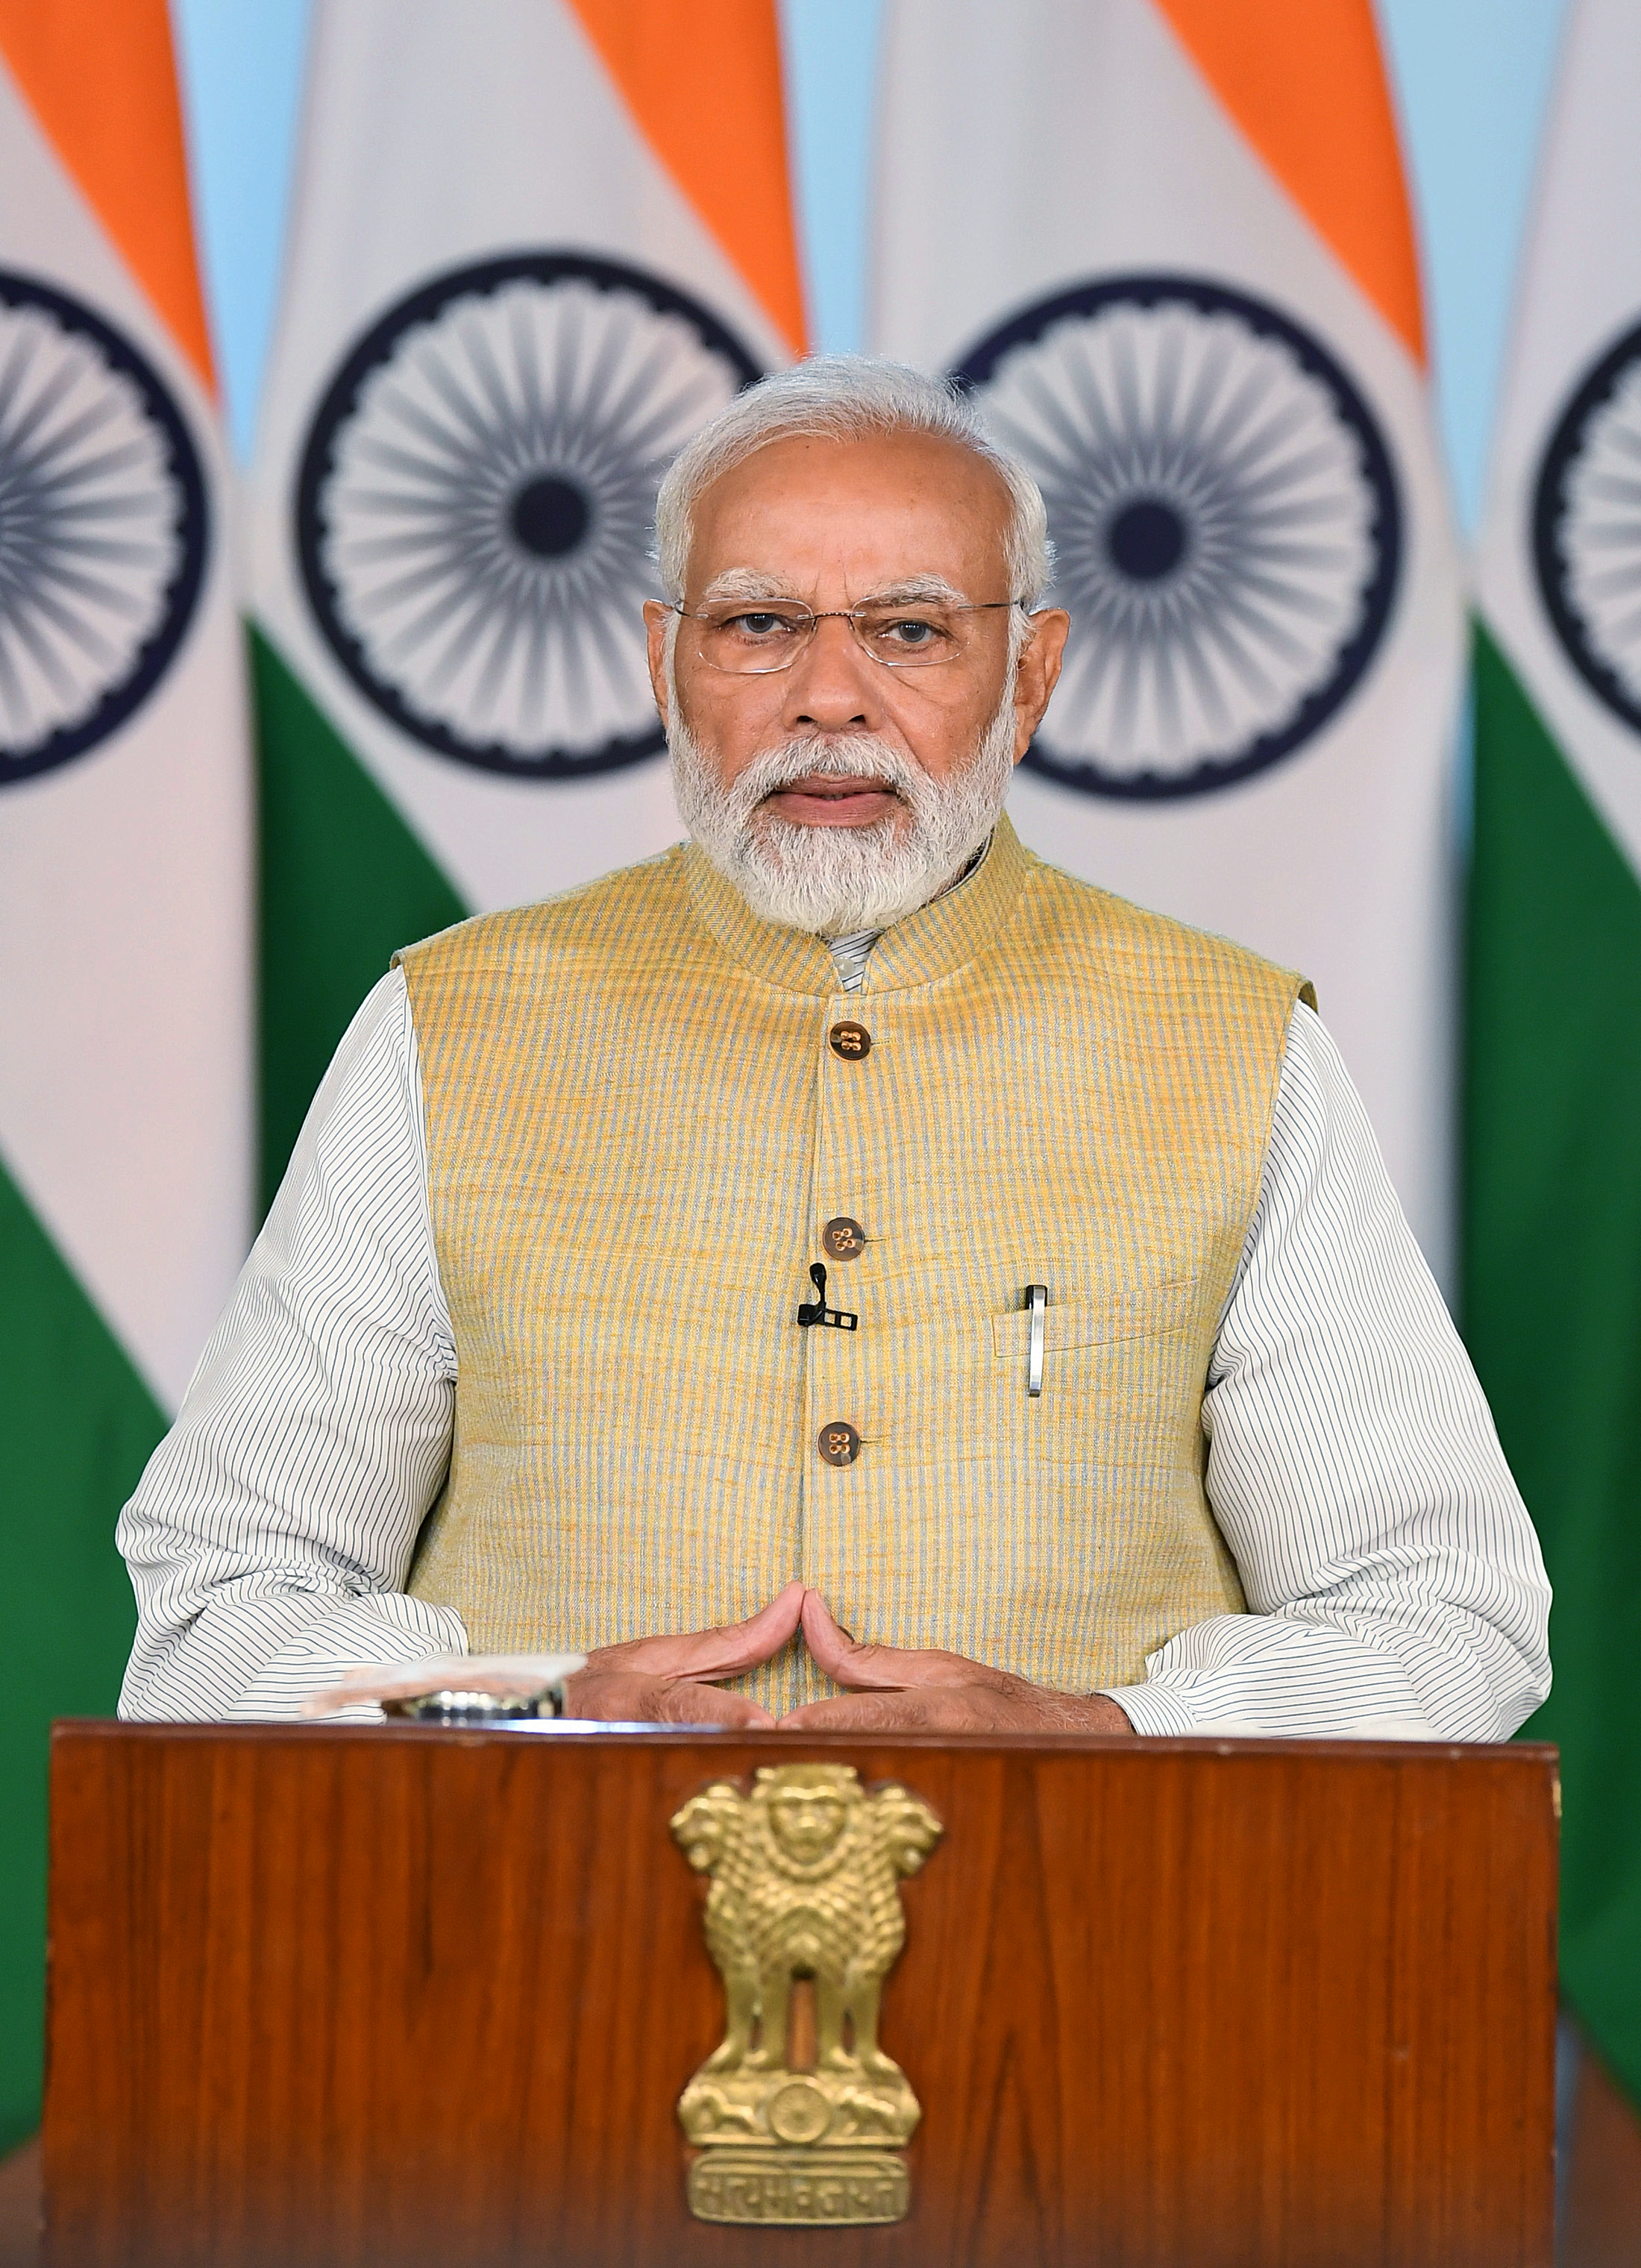 Huge investment in infrastructure to generate employment: PM Modi